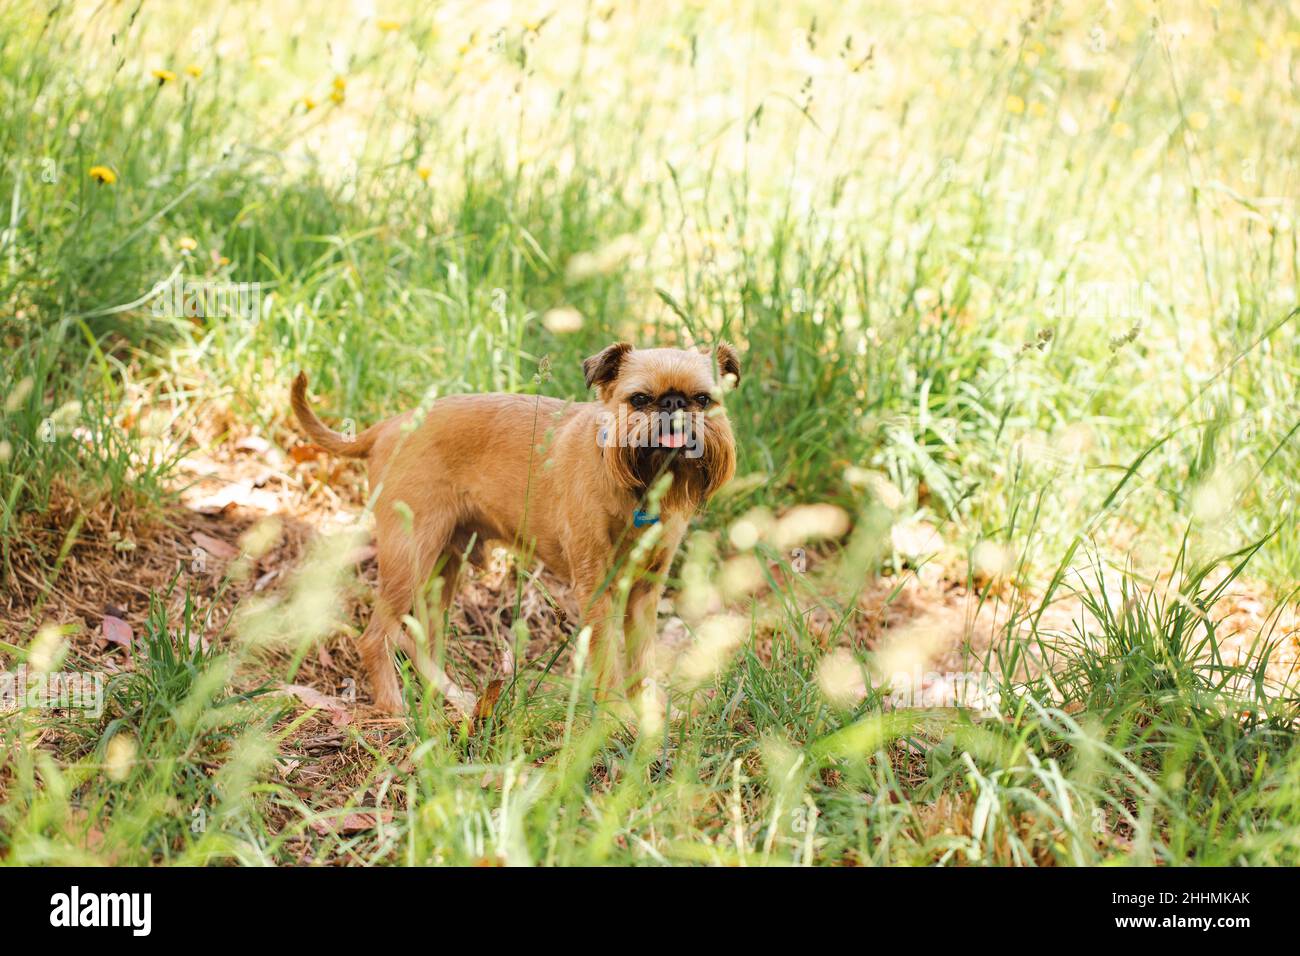 Closeup of the Griffon Bruxellois dog outdoors. Brussels Griffon. Stock Photo